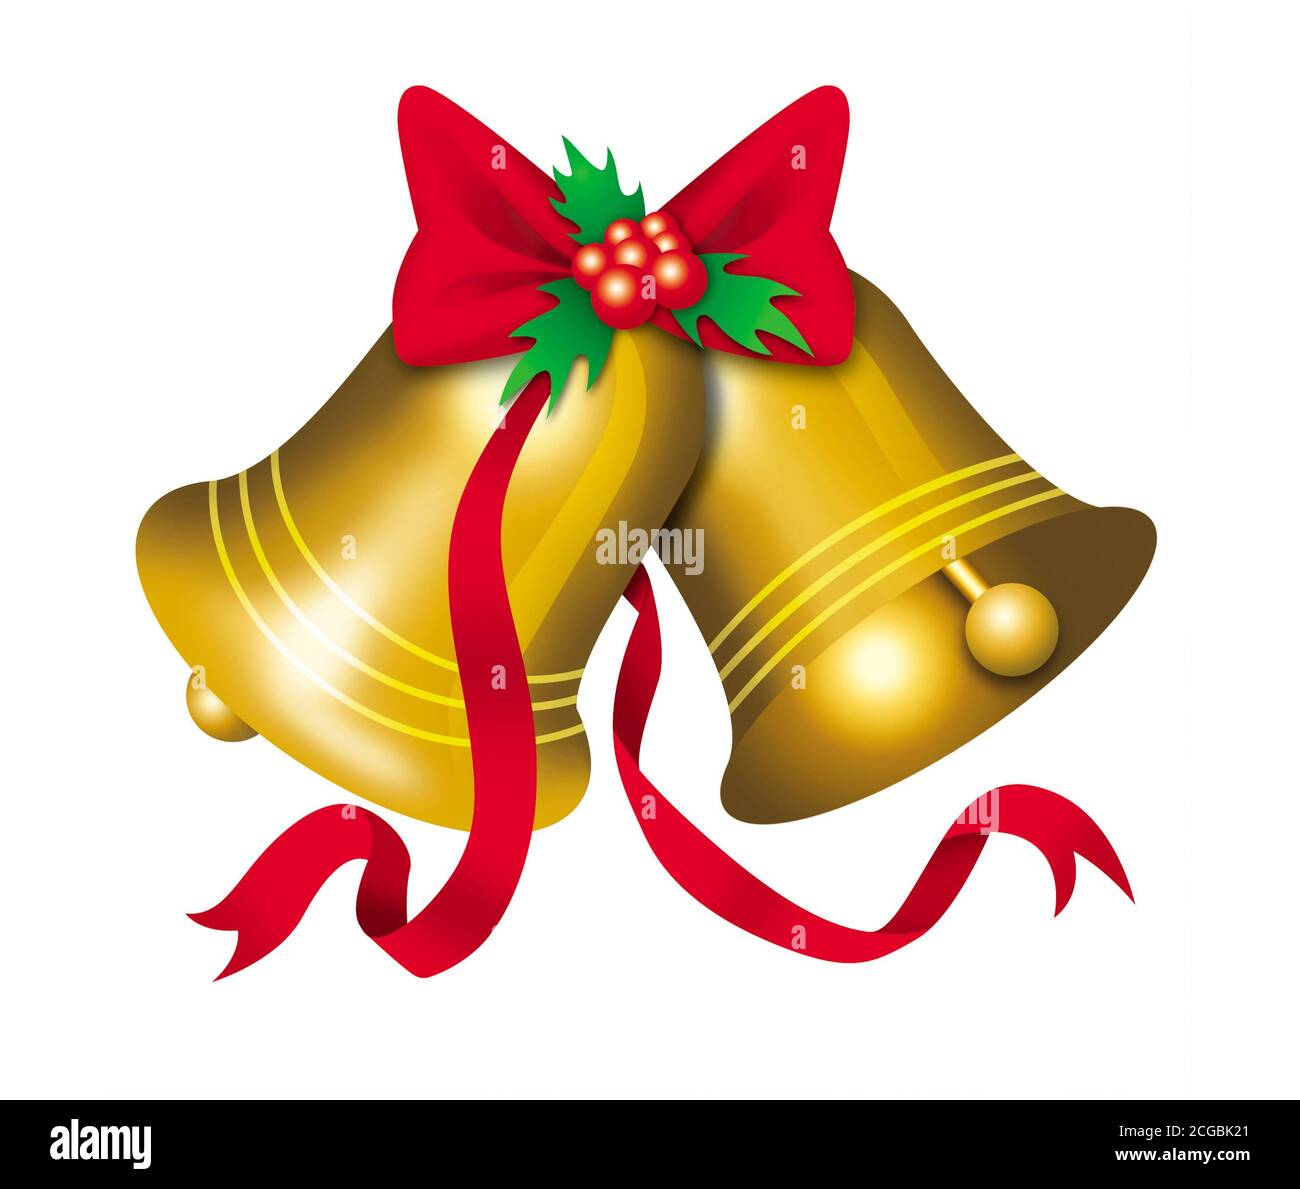 Illustration of christmas bells with a red bow Stock Photo